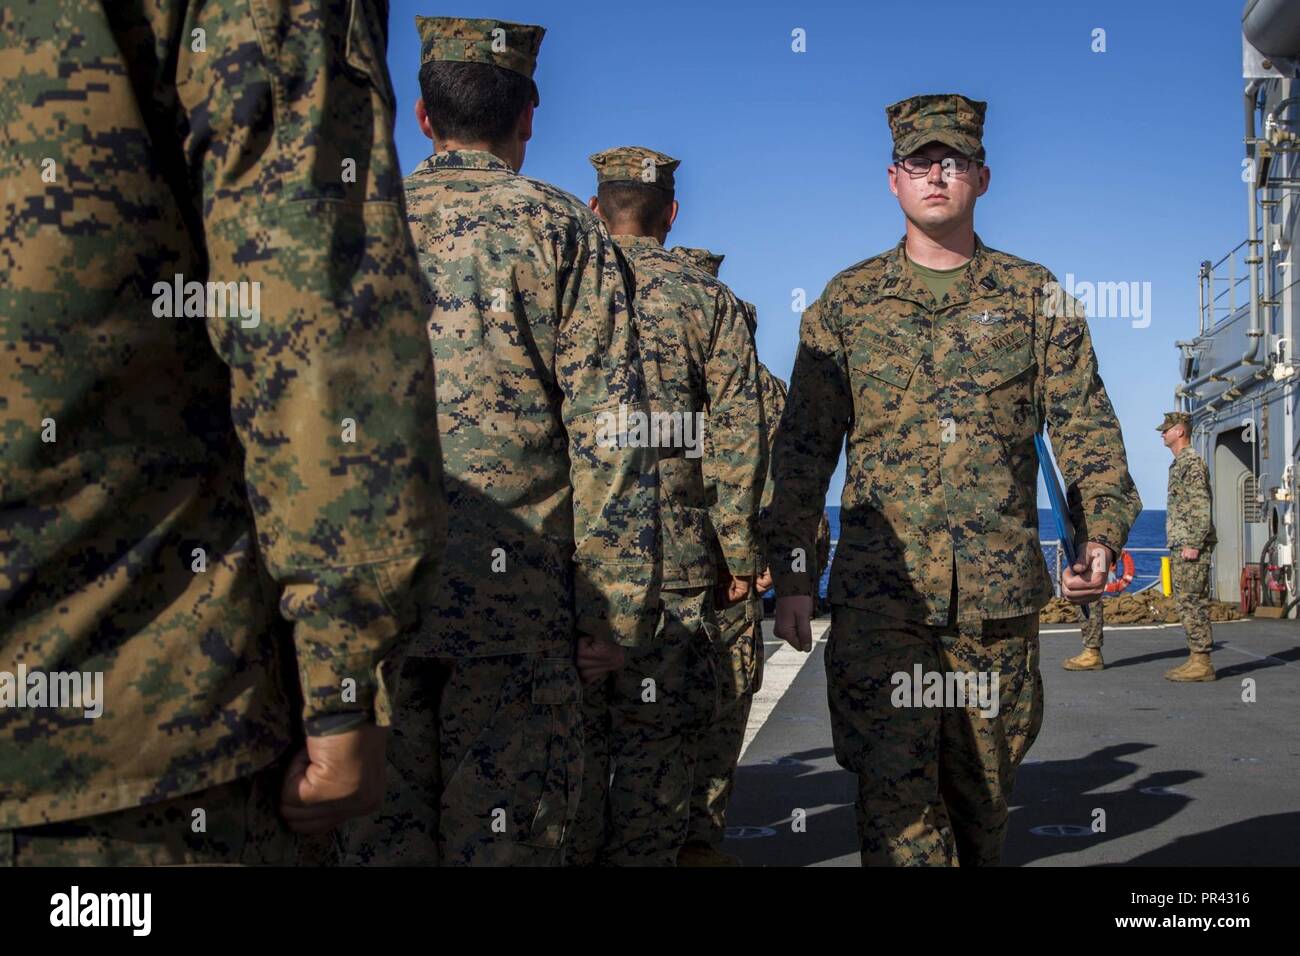 Navy Seaman Charles Patrick, a hospital man attached to Task Force Koa Moana 17 marches after receiving his Enlisted Fleet Marine Force Warfare Specialist Insignia (FMF) award on the USNS Sacagawea, July 28, 2017. The FMF award is given to Navy enlisted personnel who are attached to deployable U.S. Marine Corps units and pass verbal and written exams qualifying the individual adept in Marine Corps history, and knowledge. Stock Photo